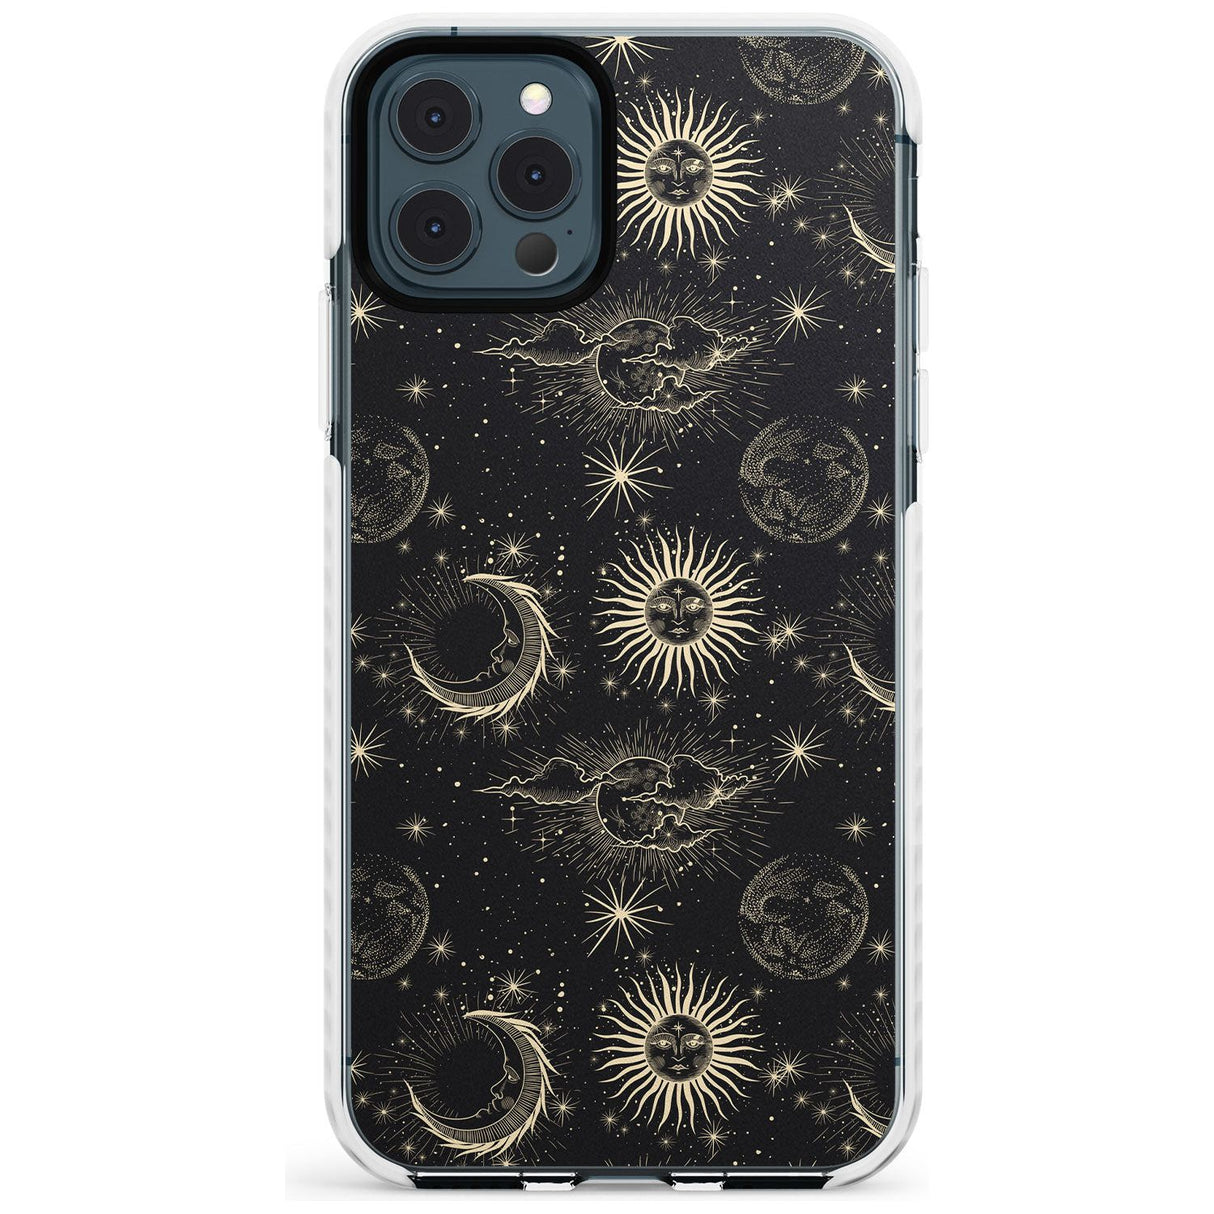 Large Suns, Moons & Clouds Slim TPU Phone Case for iPhone 11 Pro Max